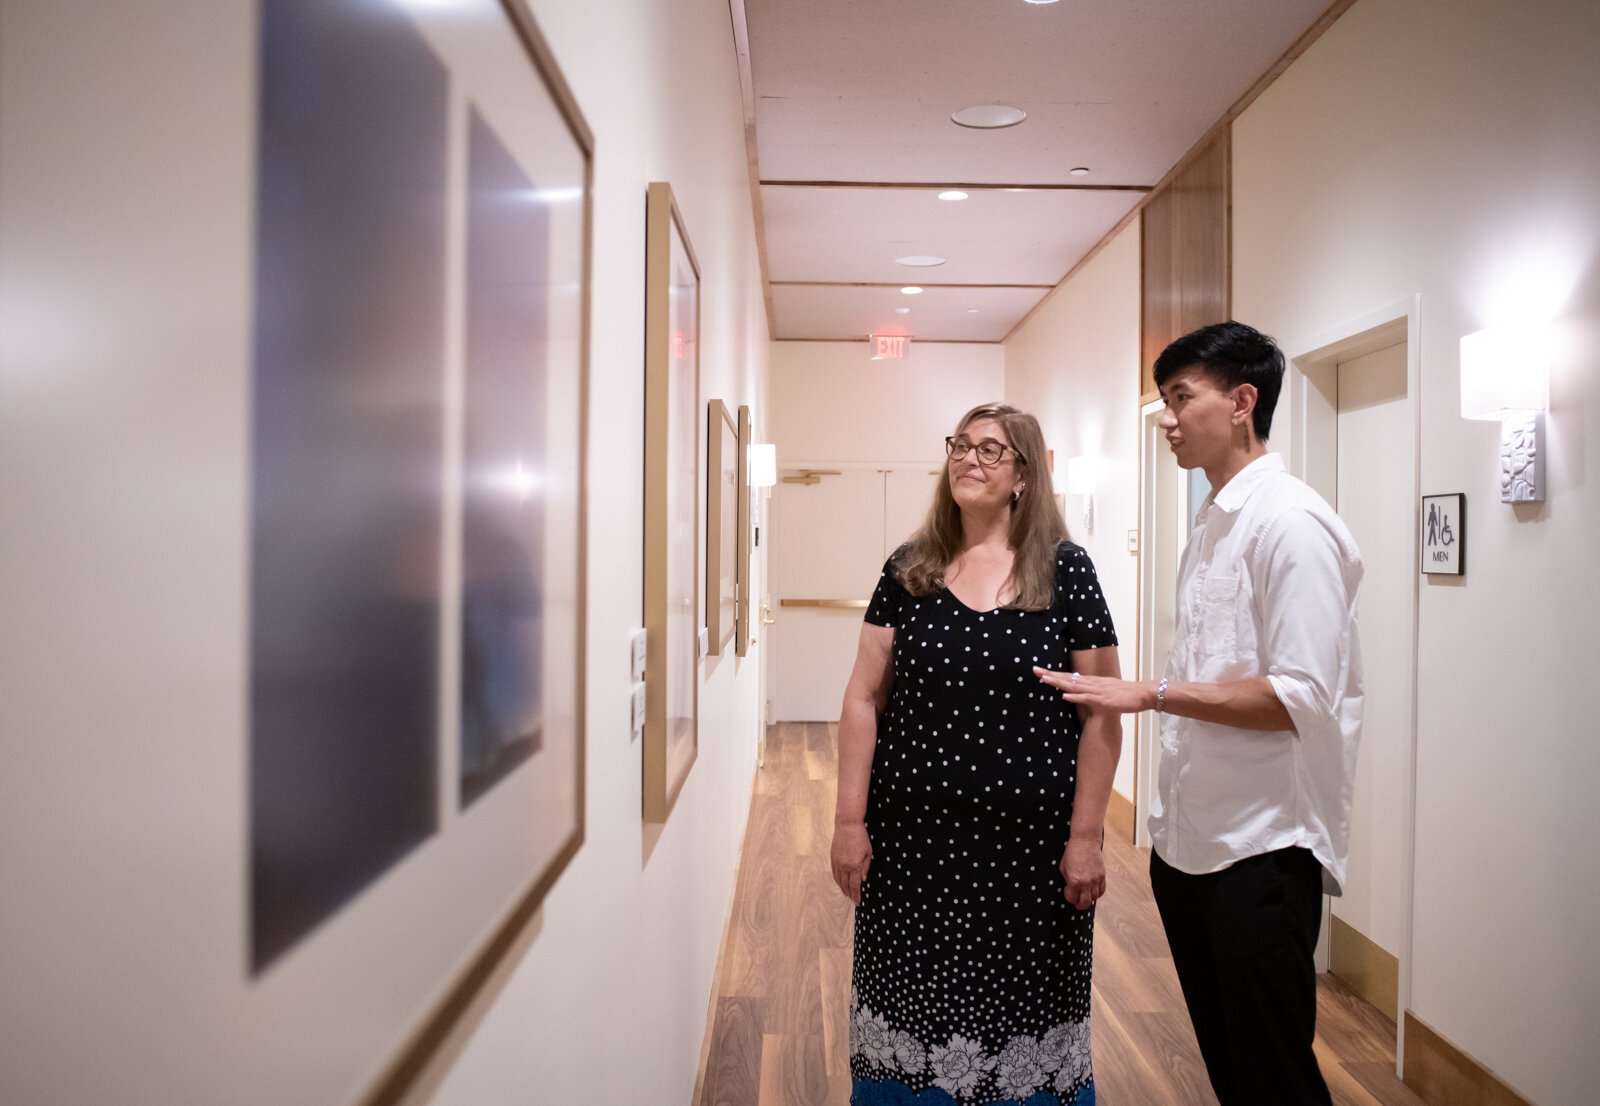 PFW Professor Rebecca Coffman and recent PFW graduate and artist Johnny Min walk through the new revolving gallery featuring work from Purdue Fort Wayne students, alumni and faculty at The Bradley, 204 W. Main St. 